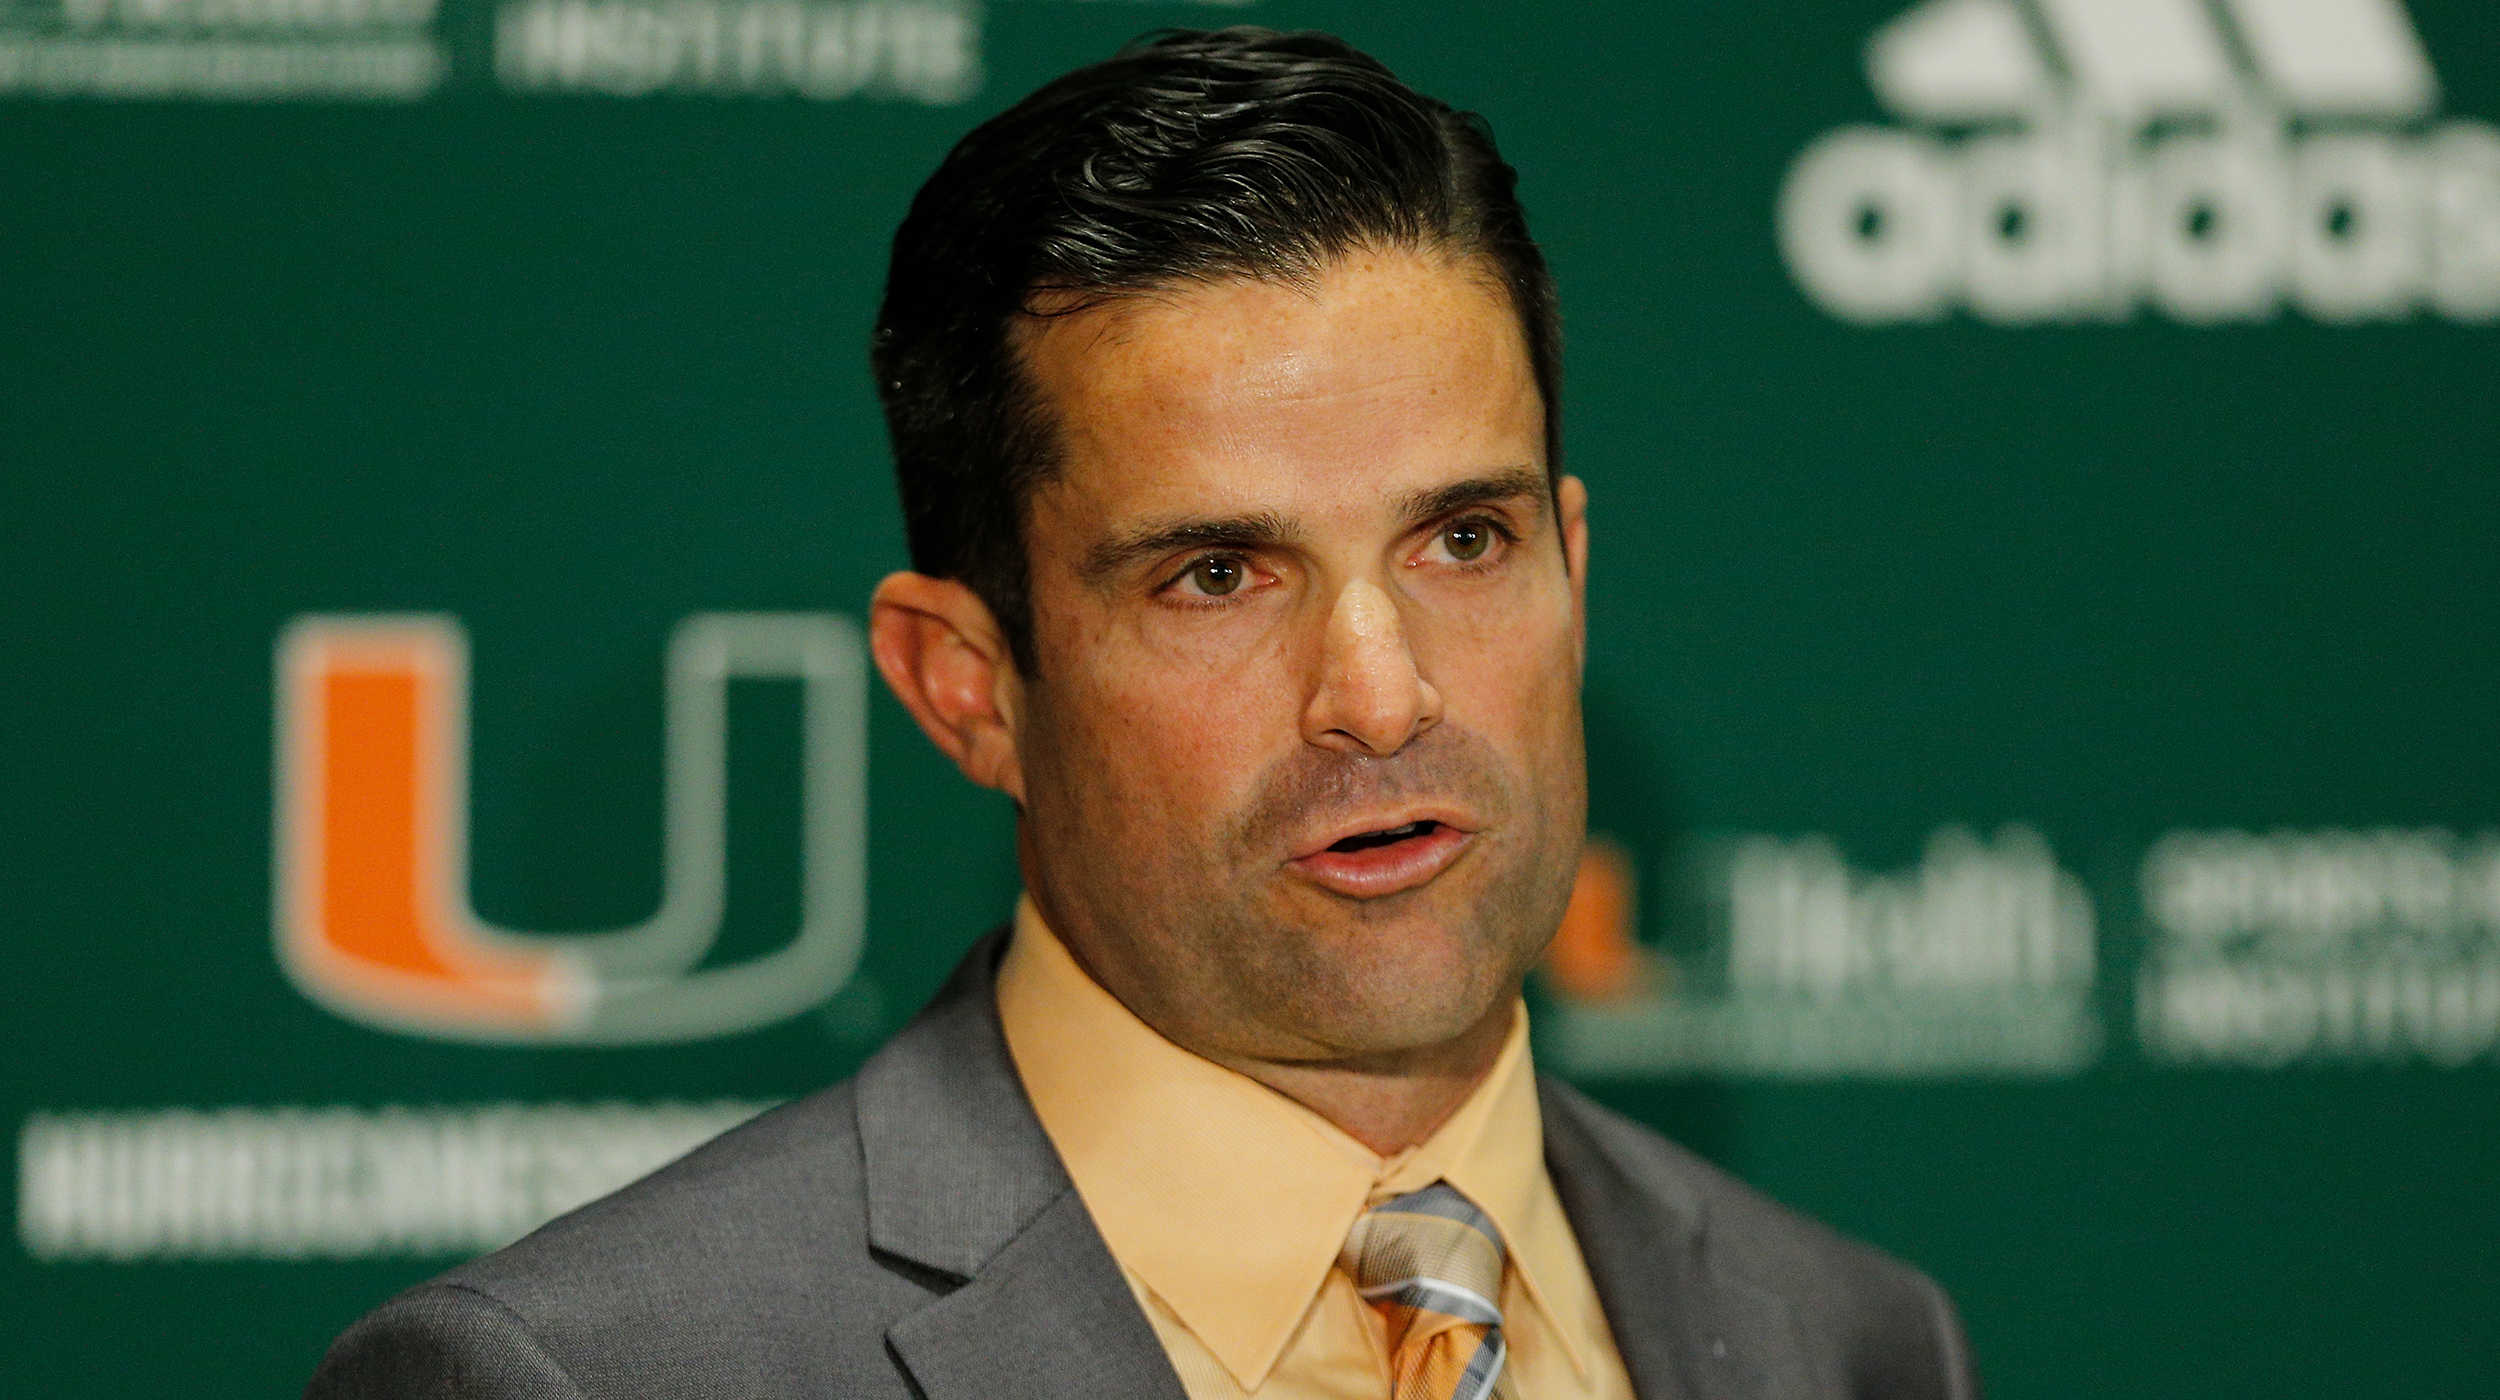 Manny Diaz of the Miami Hurricanes addresses the media during his introductory press conference in the Mann Auditorium at the Schwartz Center on January 2, 2019 in Coral Gables, Florida.